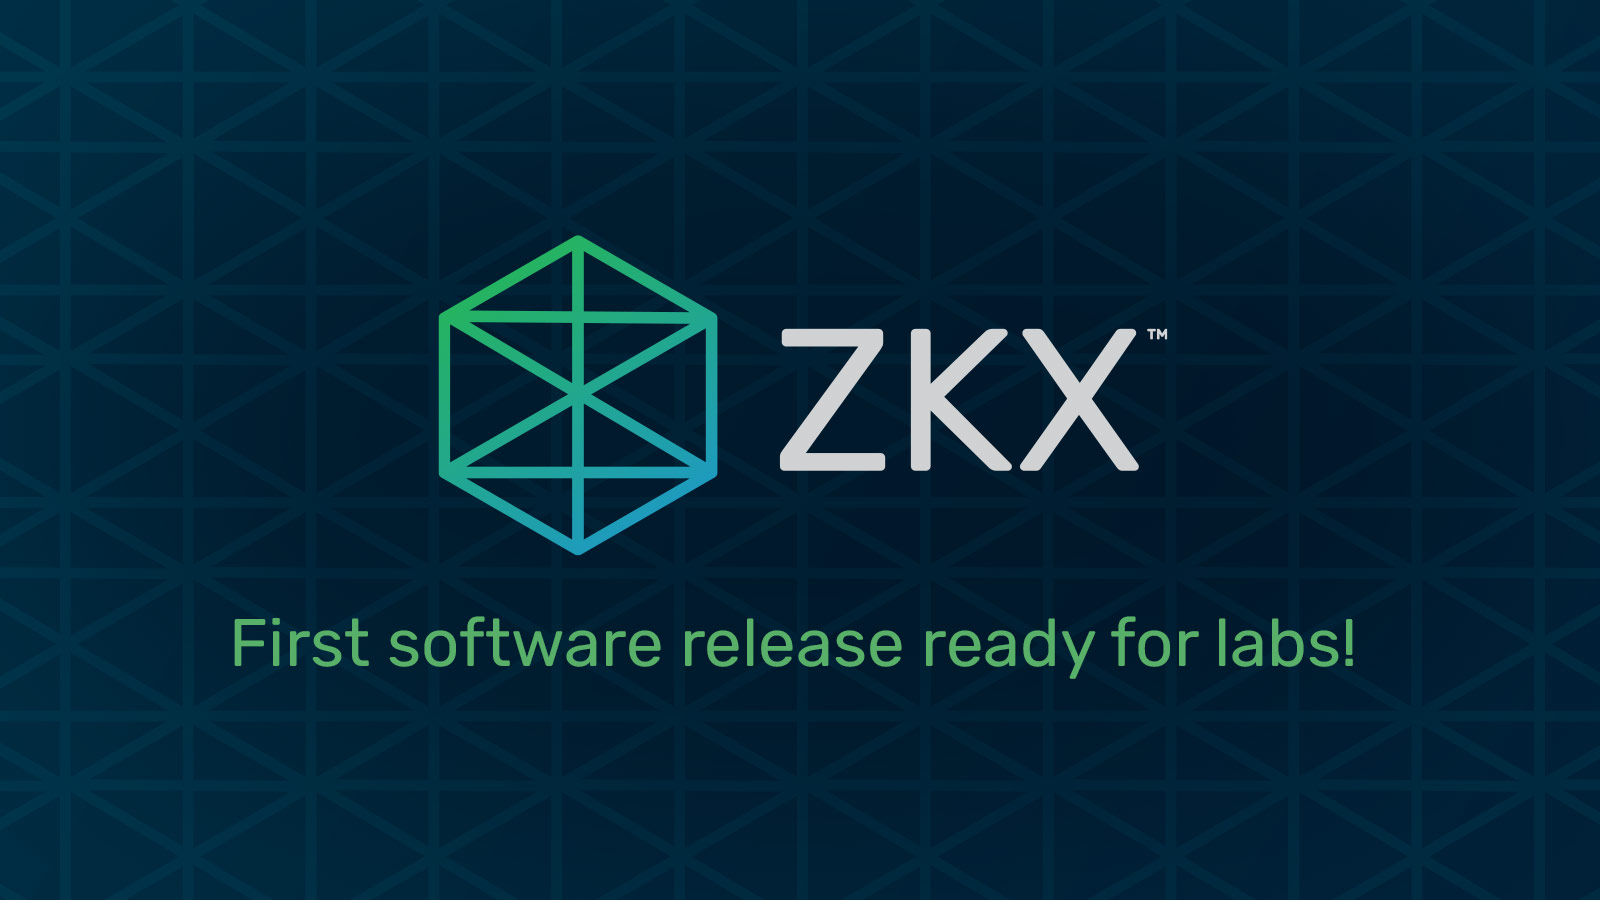 First software release ready for labs